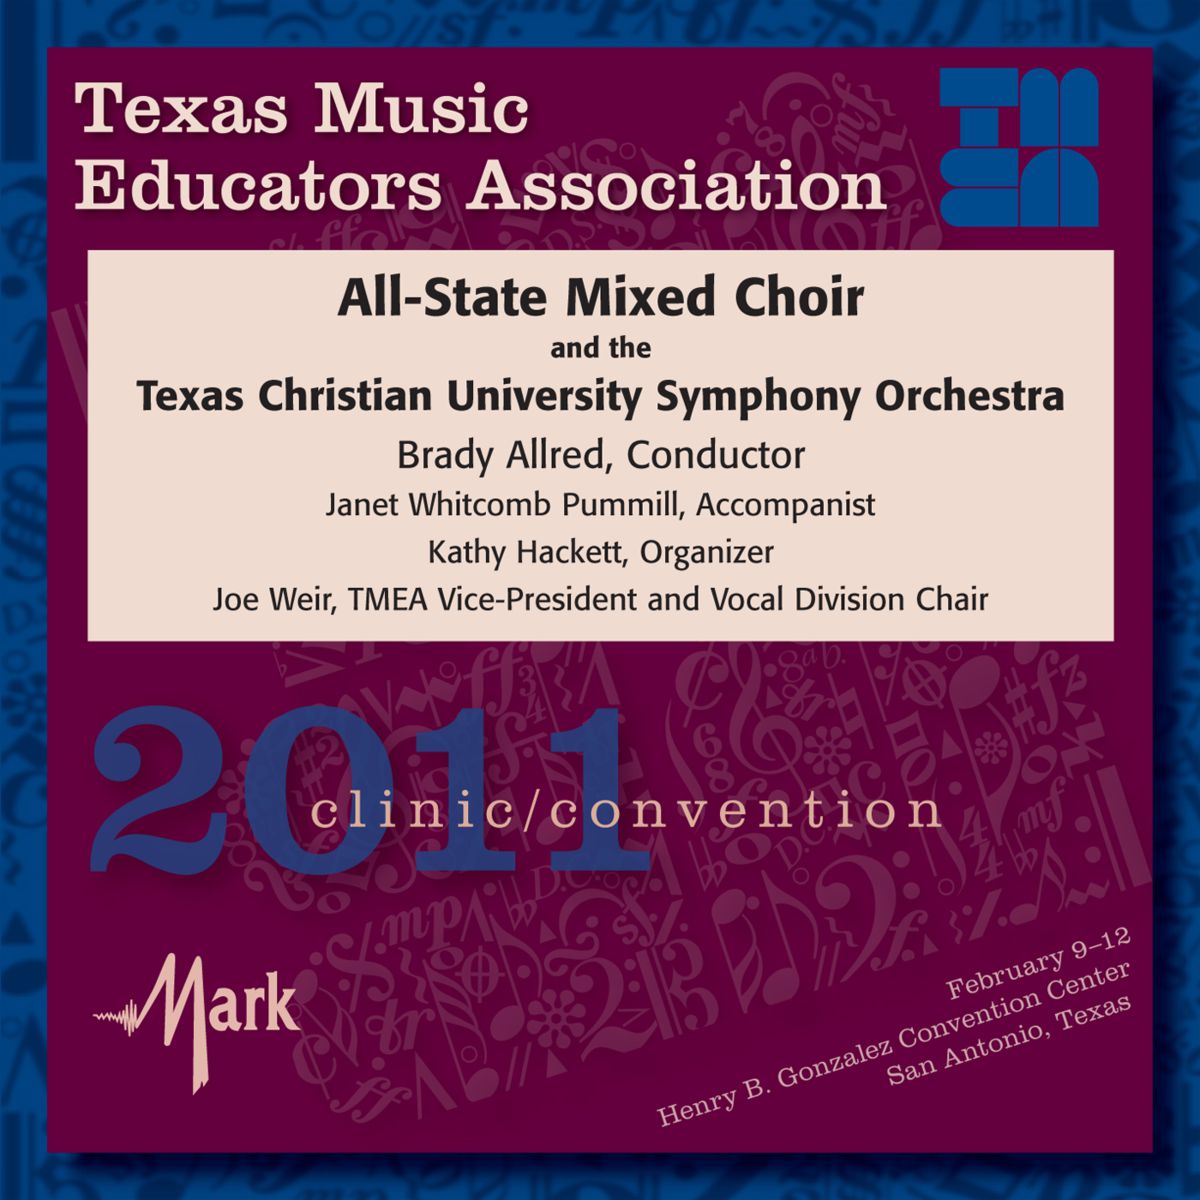 2011 Texas Music Educators Association: All-State Mixed Choir - click here